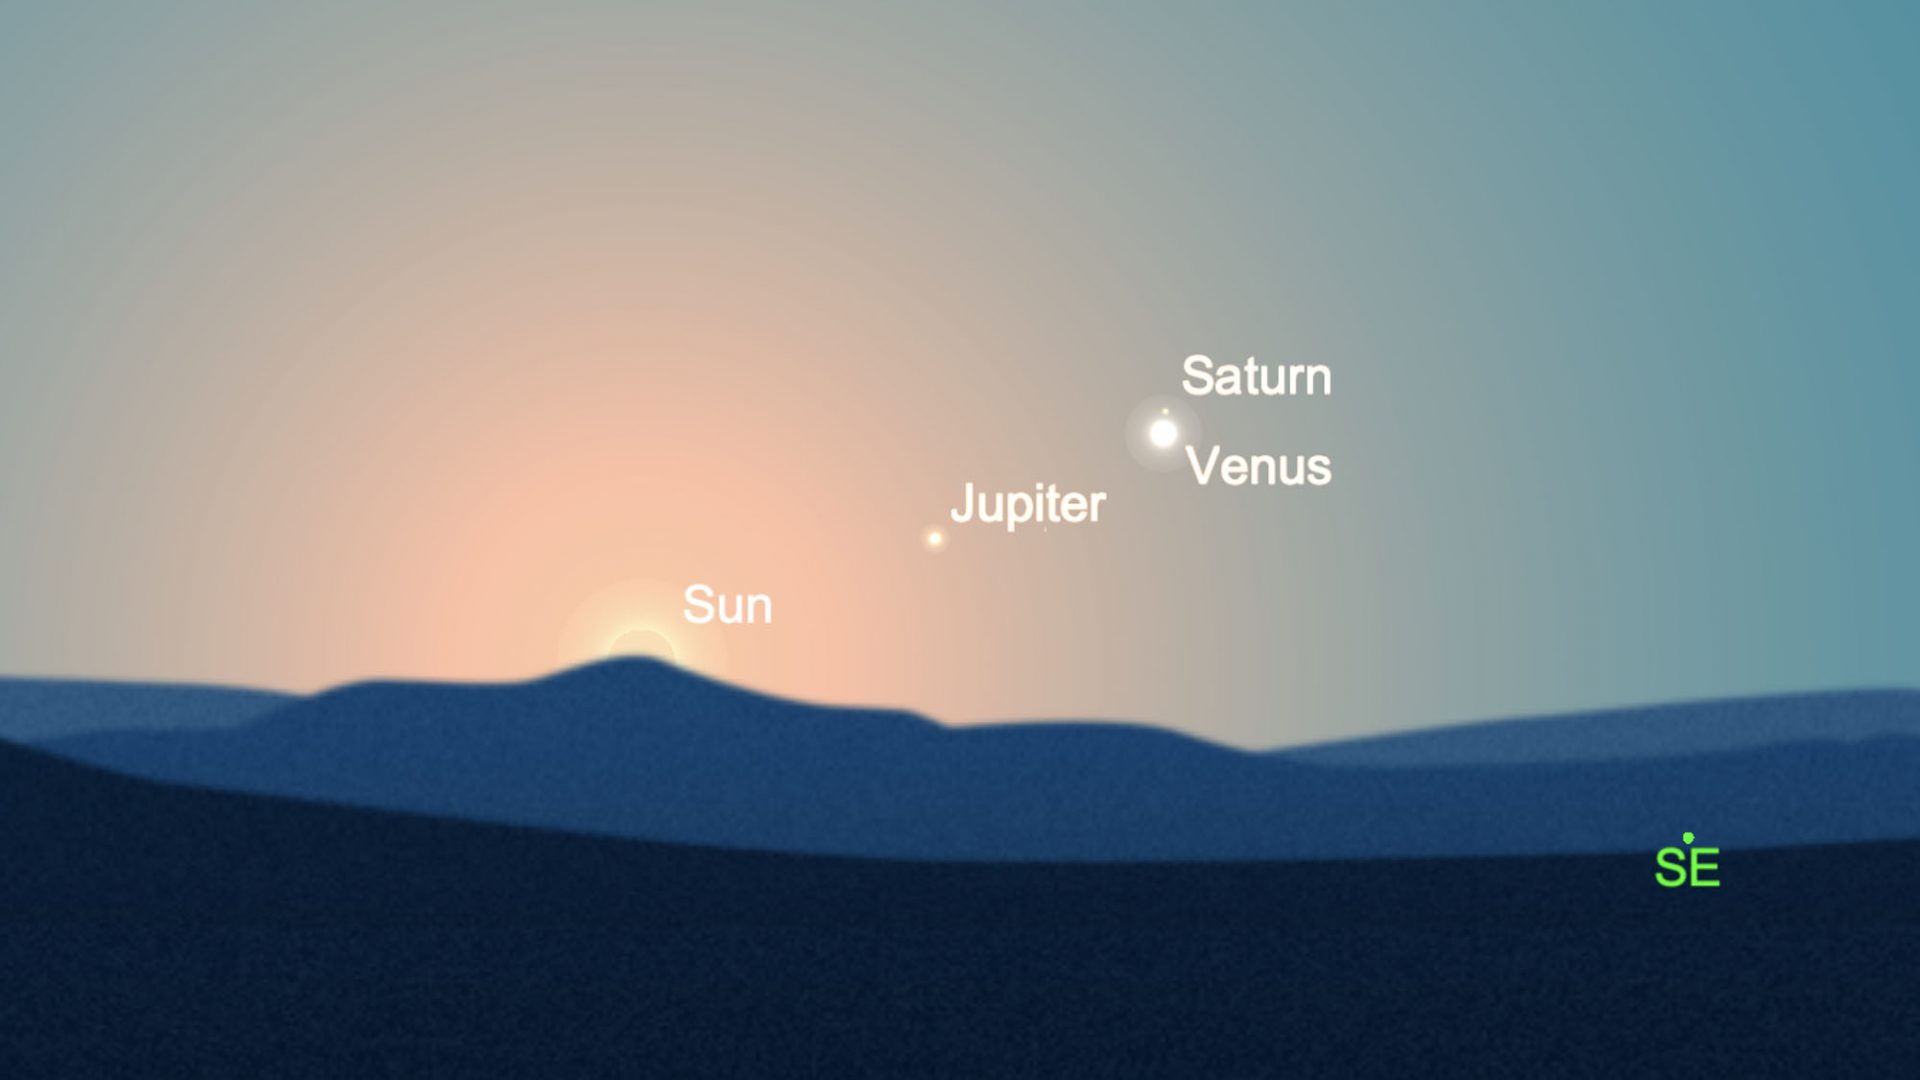 February marks a month of ‘flamable’ planets and engaging skywatching